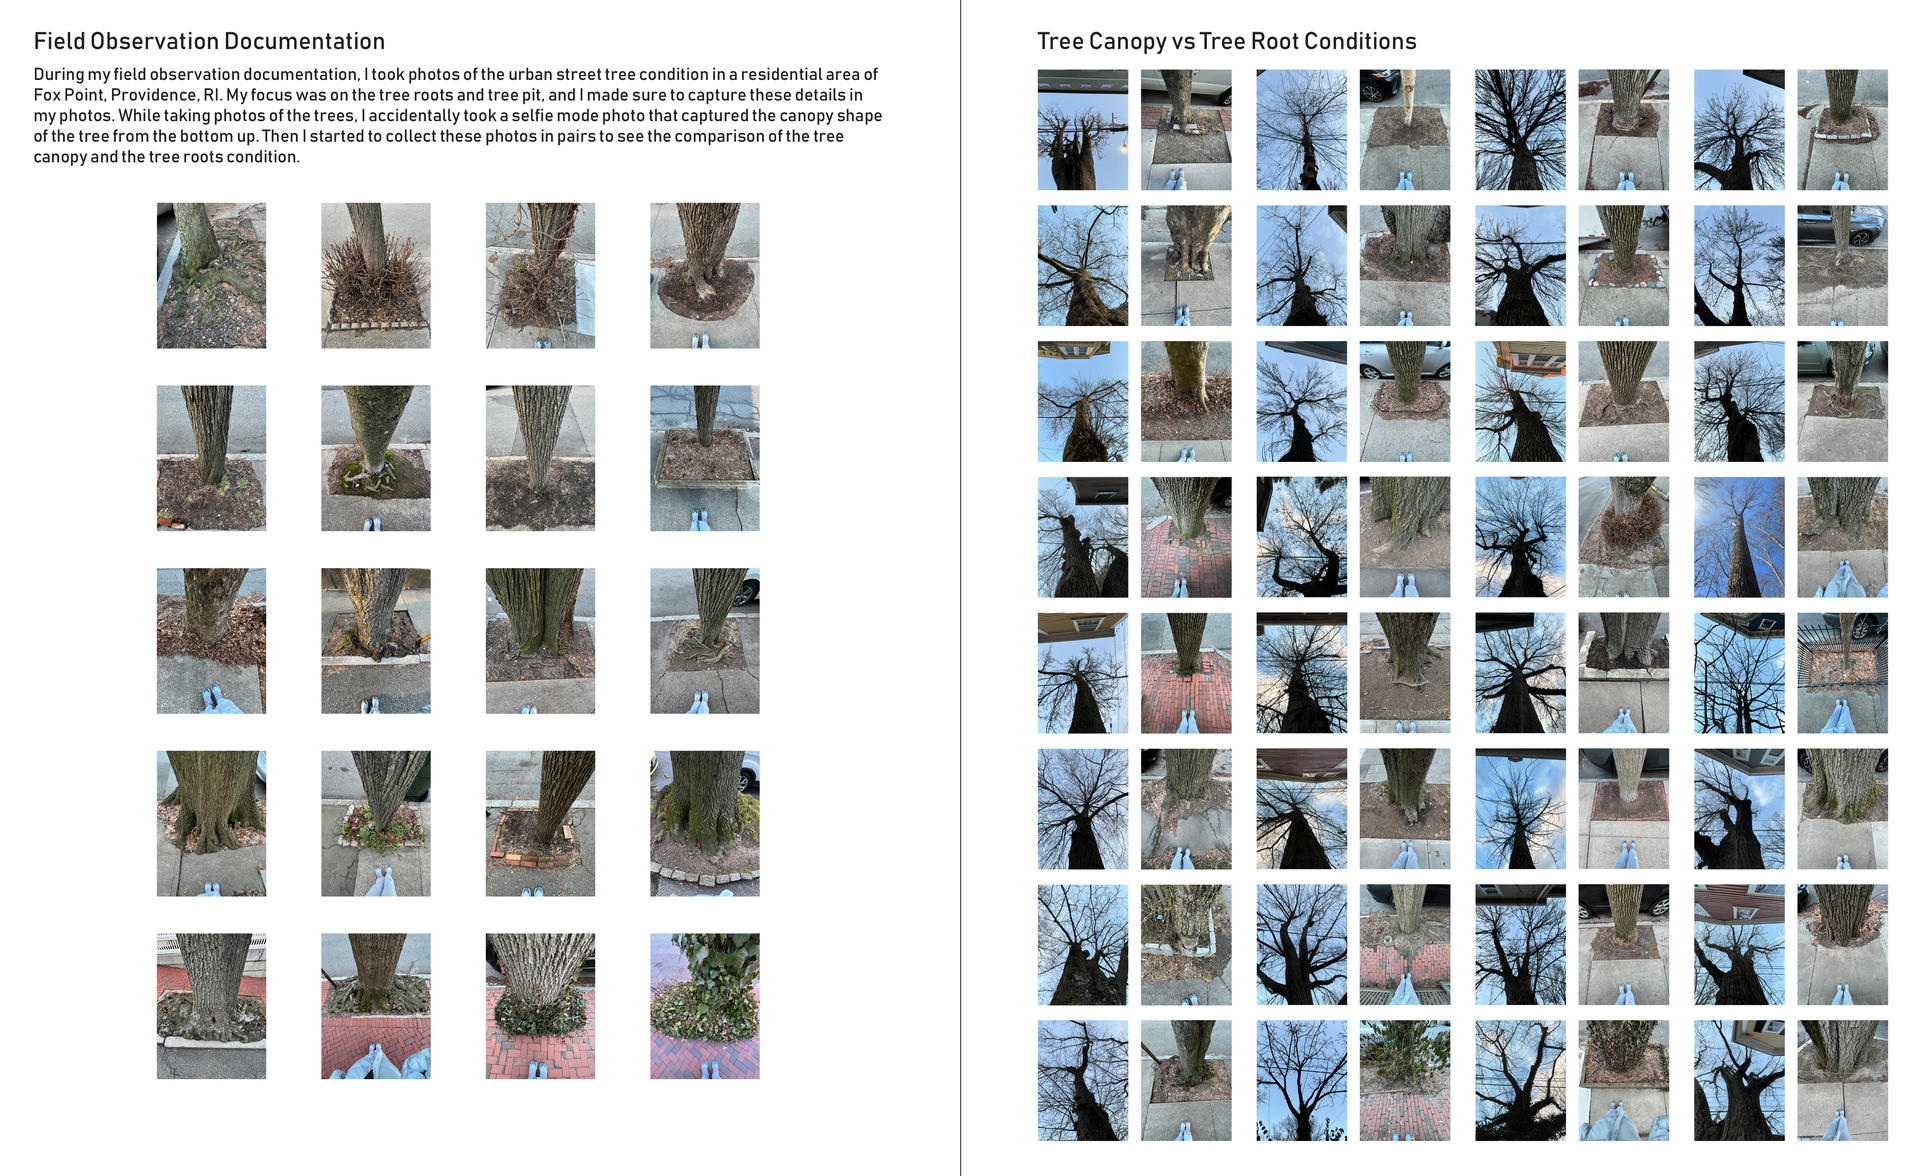 Field observation documentation of street tree canopy and street tree root conditions in pairs.